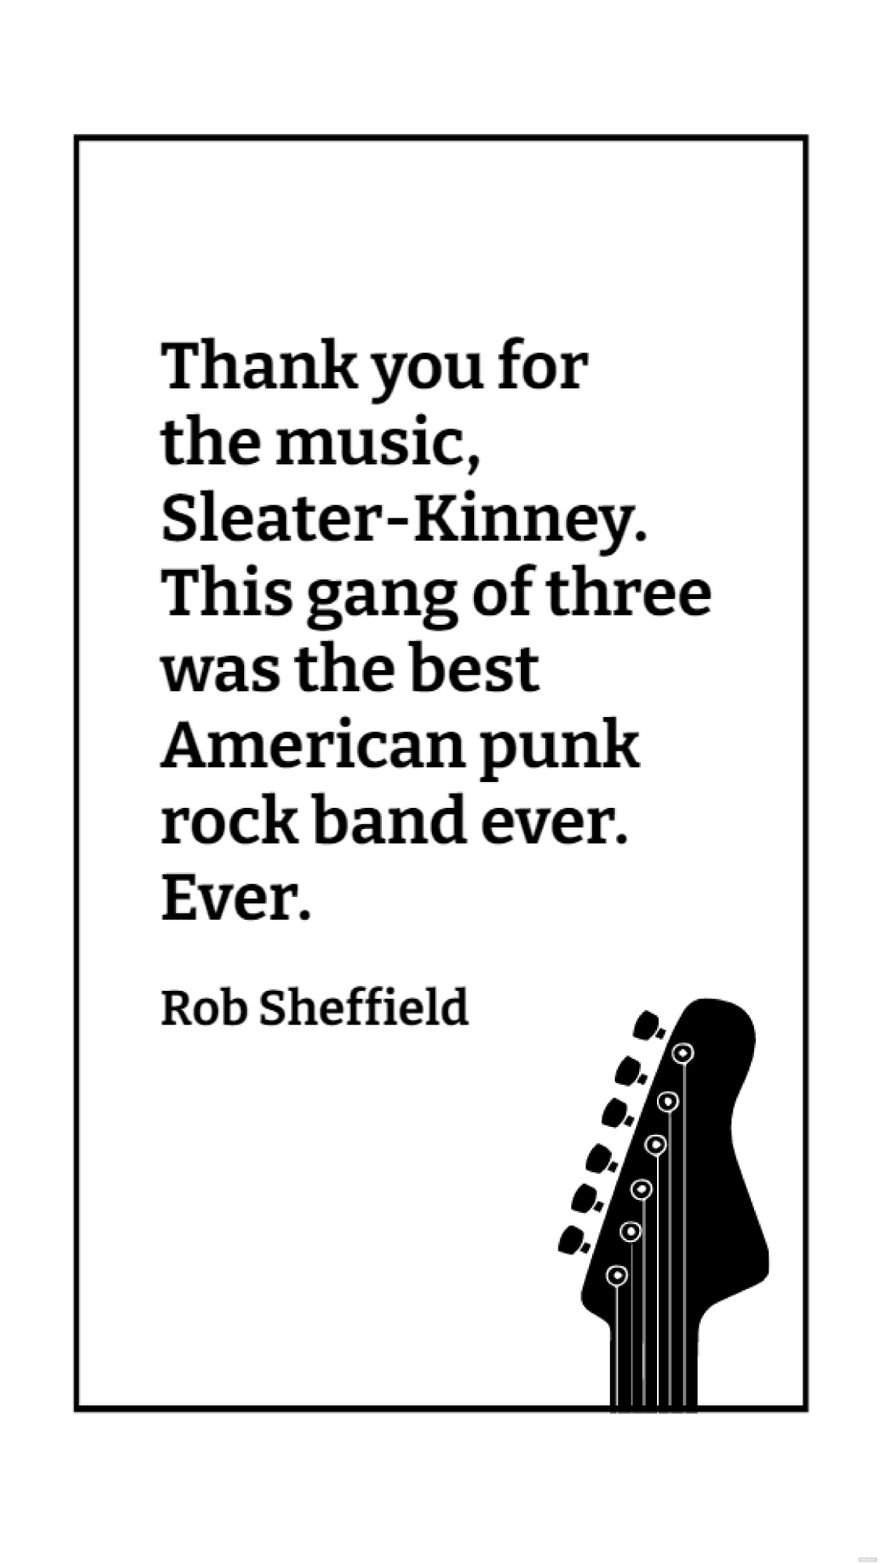 Rob Sheffield - Thank you for the music, Sleater-Kinney. This gang of three was the best American punk rock band ever. Ever.